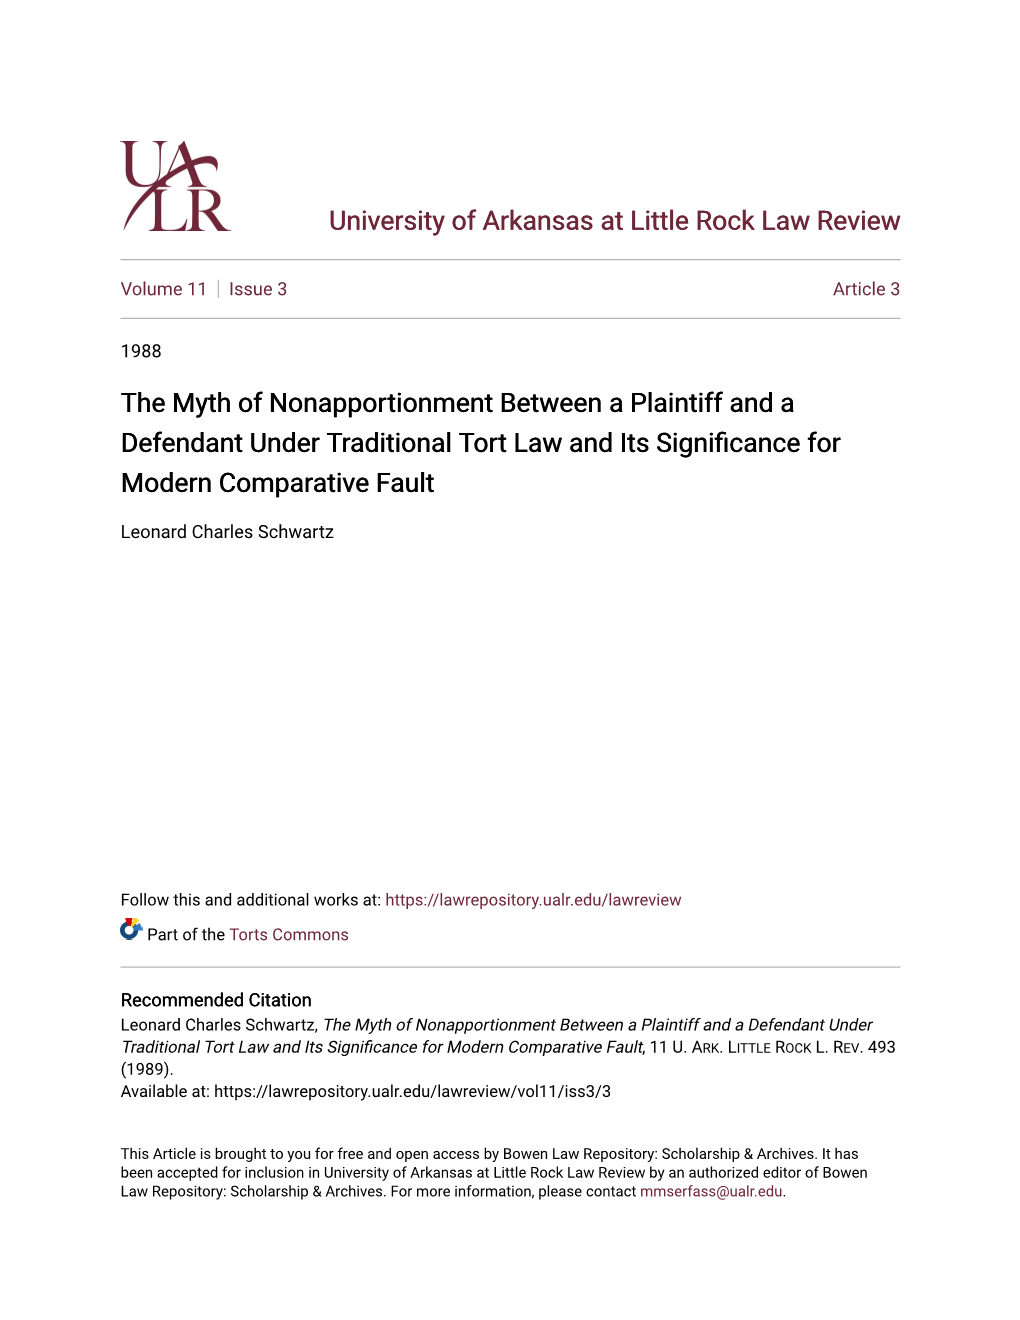 The Myth of Nonapportionment Between a Plaintiff and a Defendant Under Traditional Tort Law and Its Significance for Modern Comparative Fault